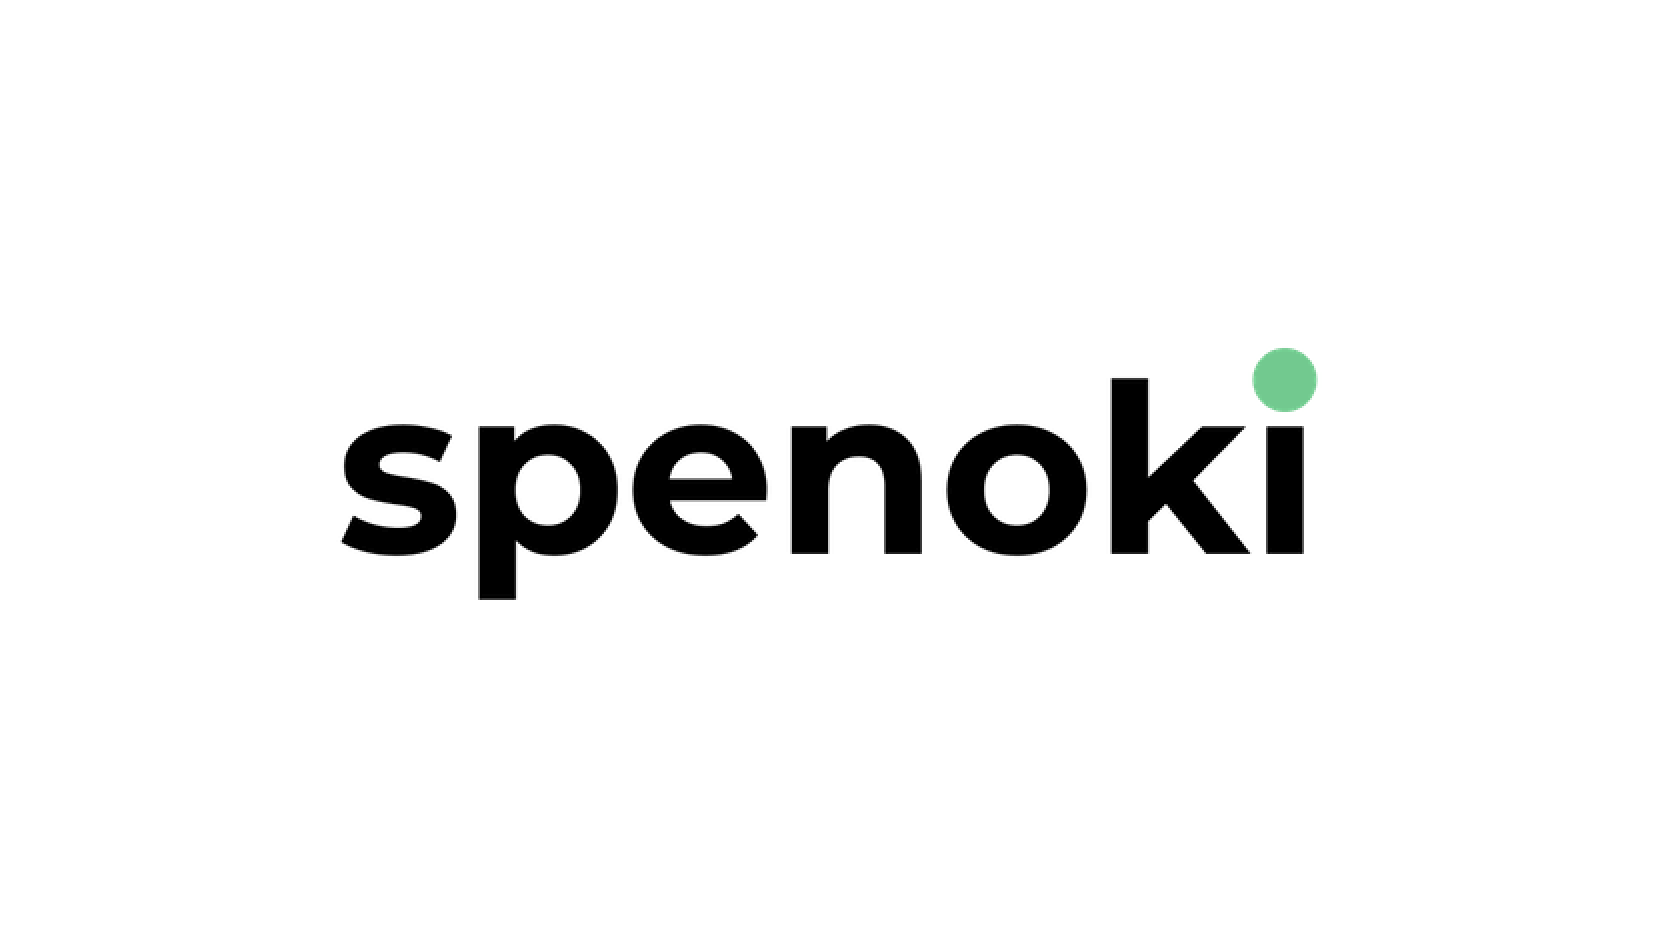 Tech & Product DD | Acquisition | Code & Co. advises EMH Partners on Spenoki